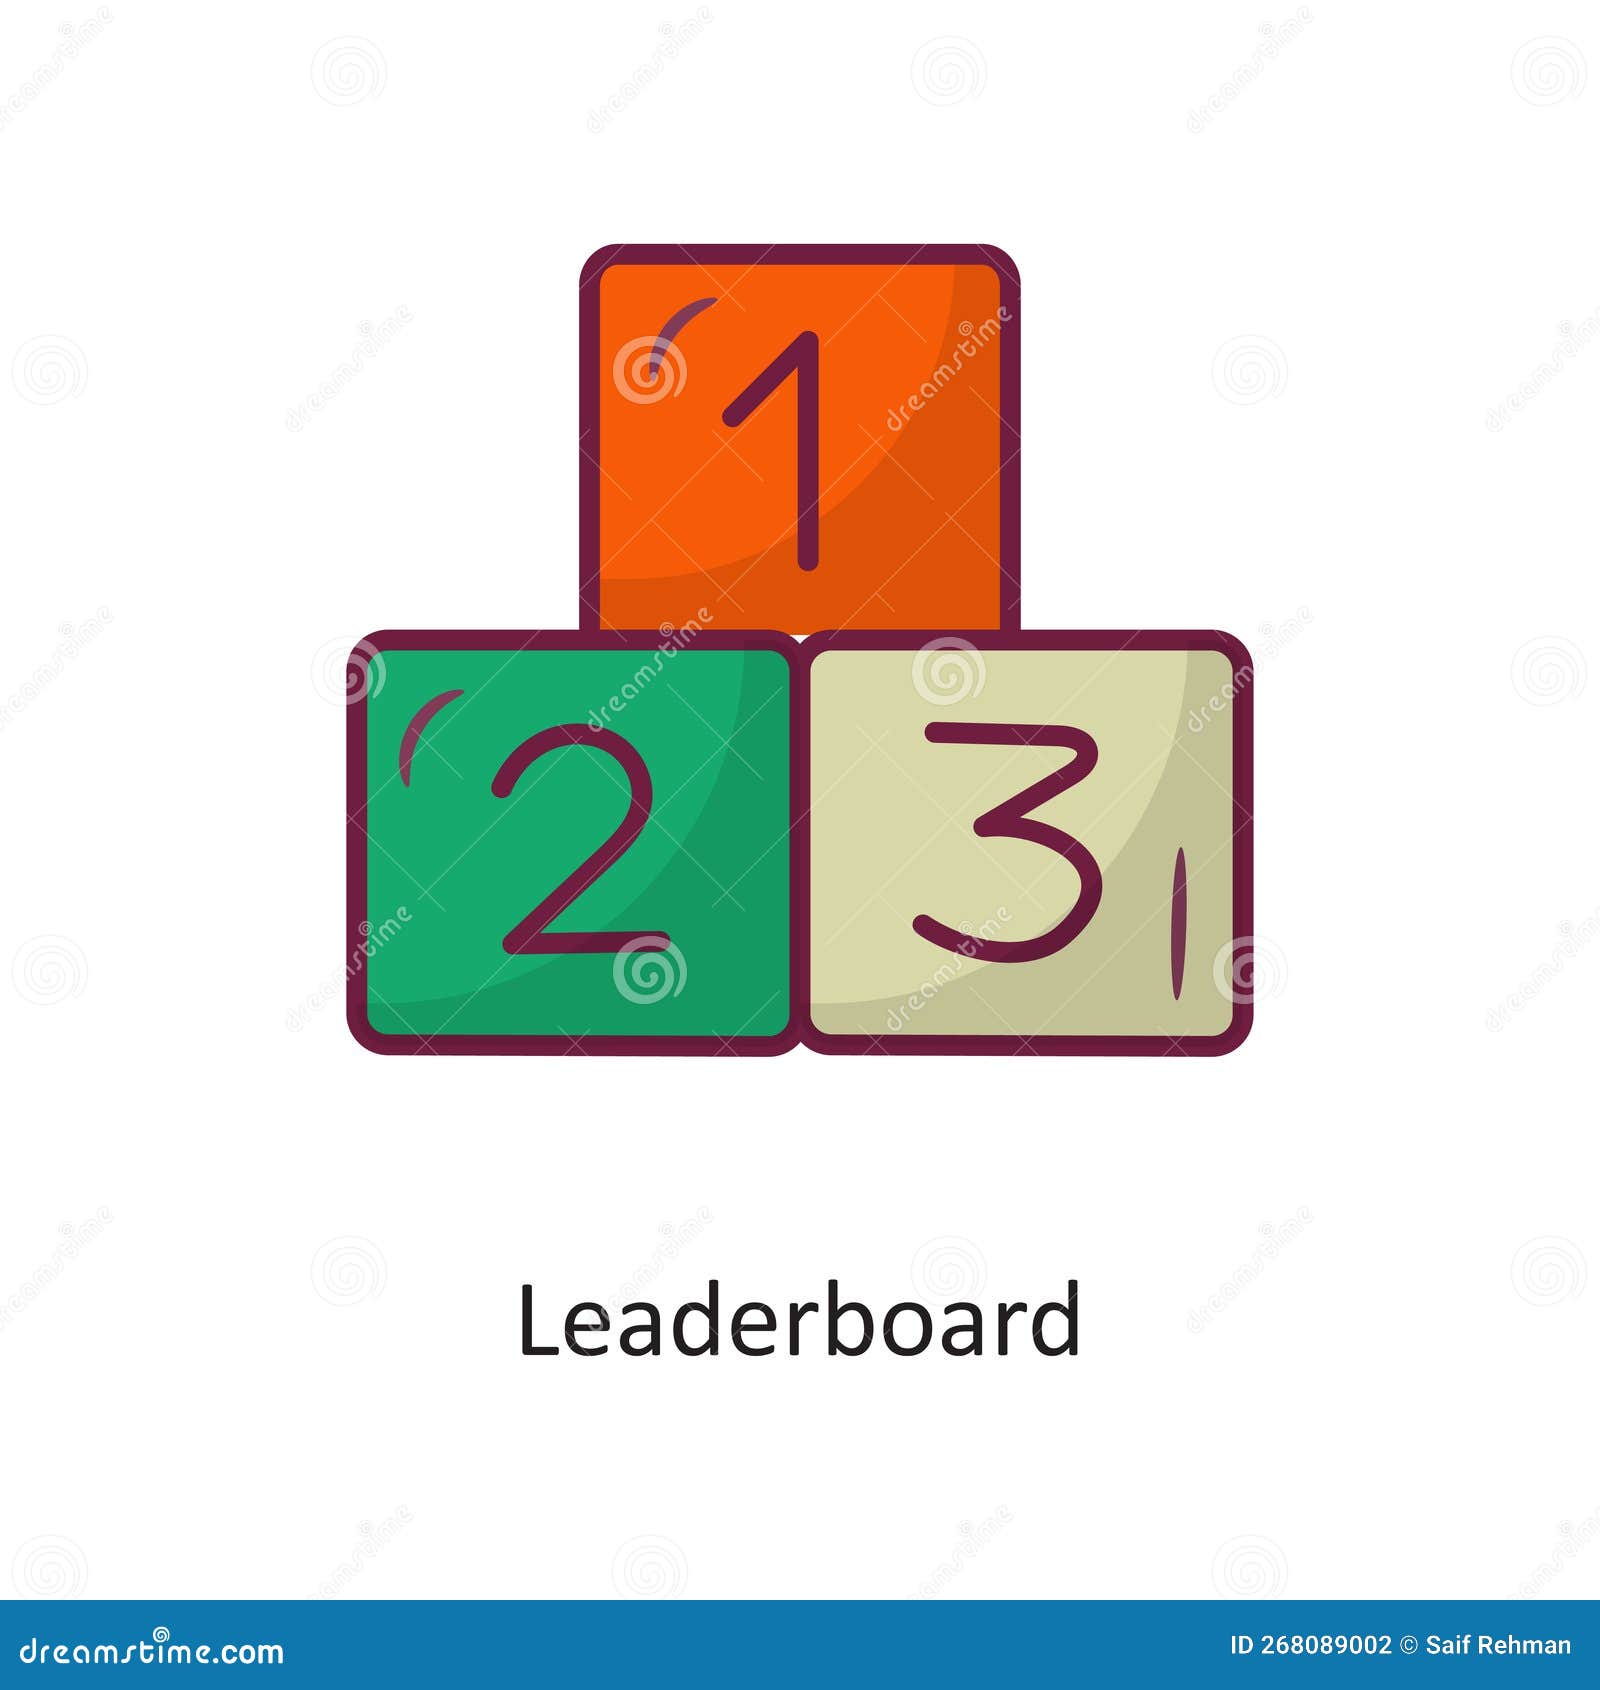 Free Vector  Cartoon leaderboard template for game